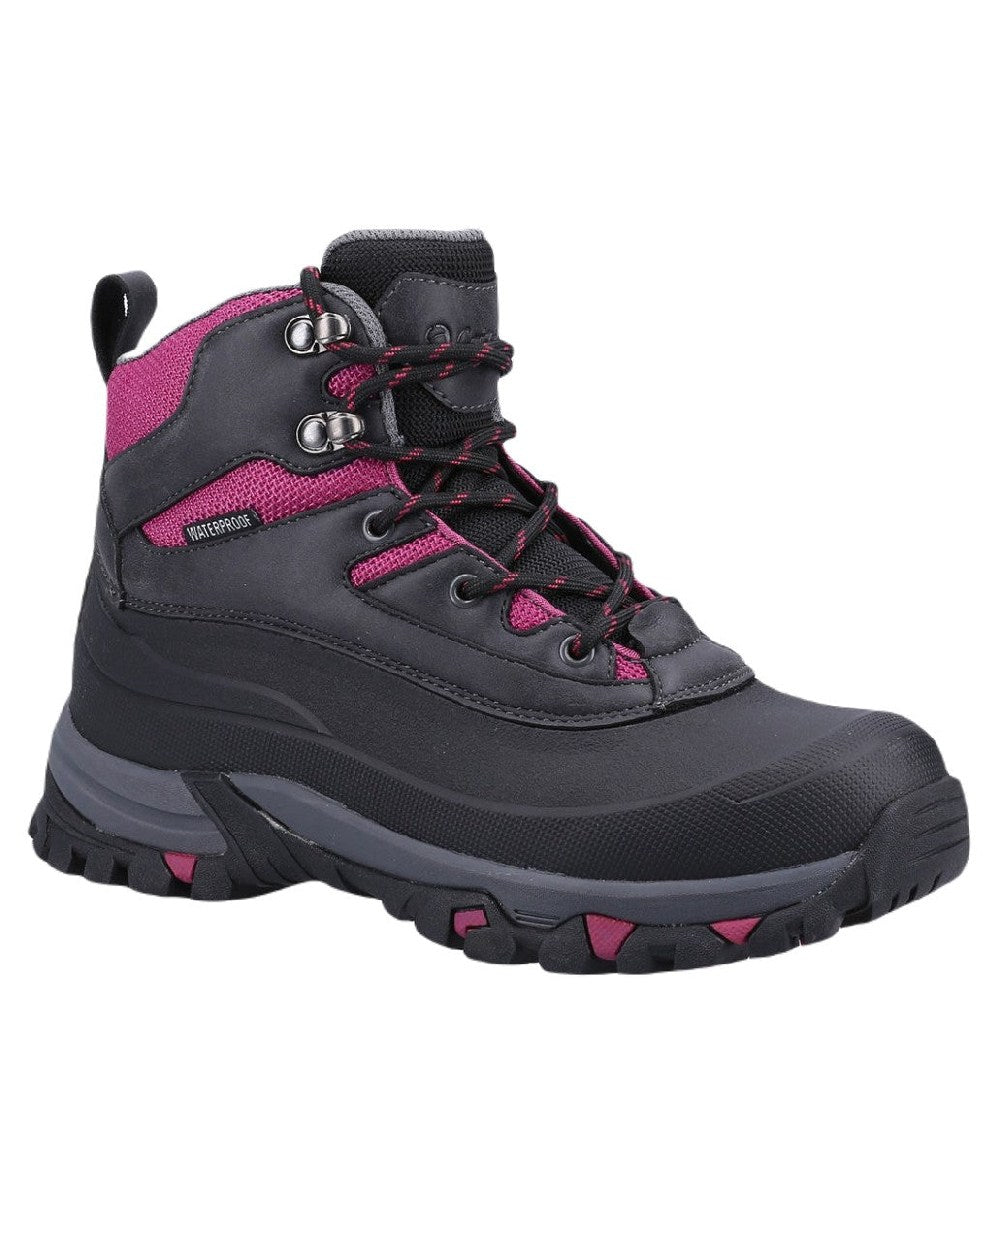 Grey/Berry coloured Cotswold Calmsden Womens Hiking Boots on white background 